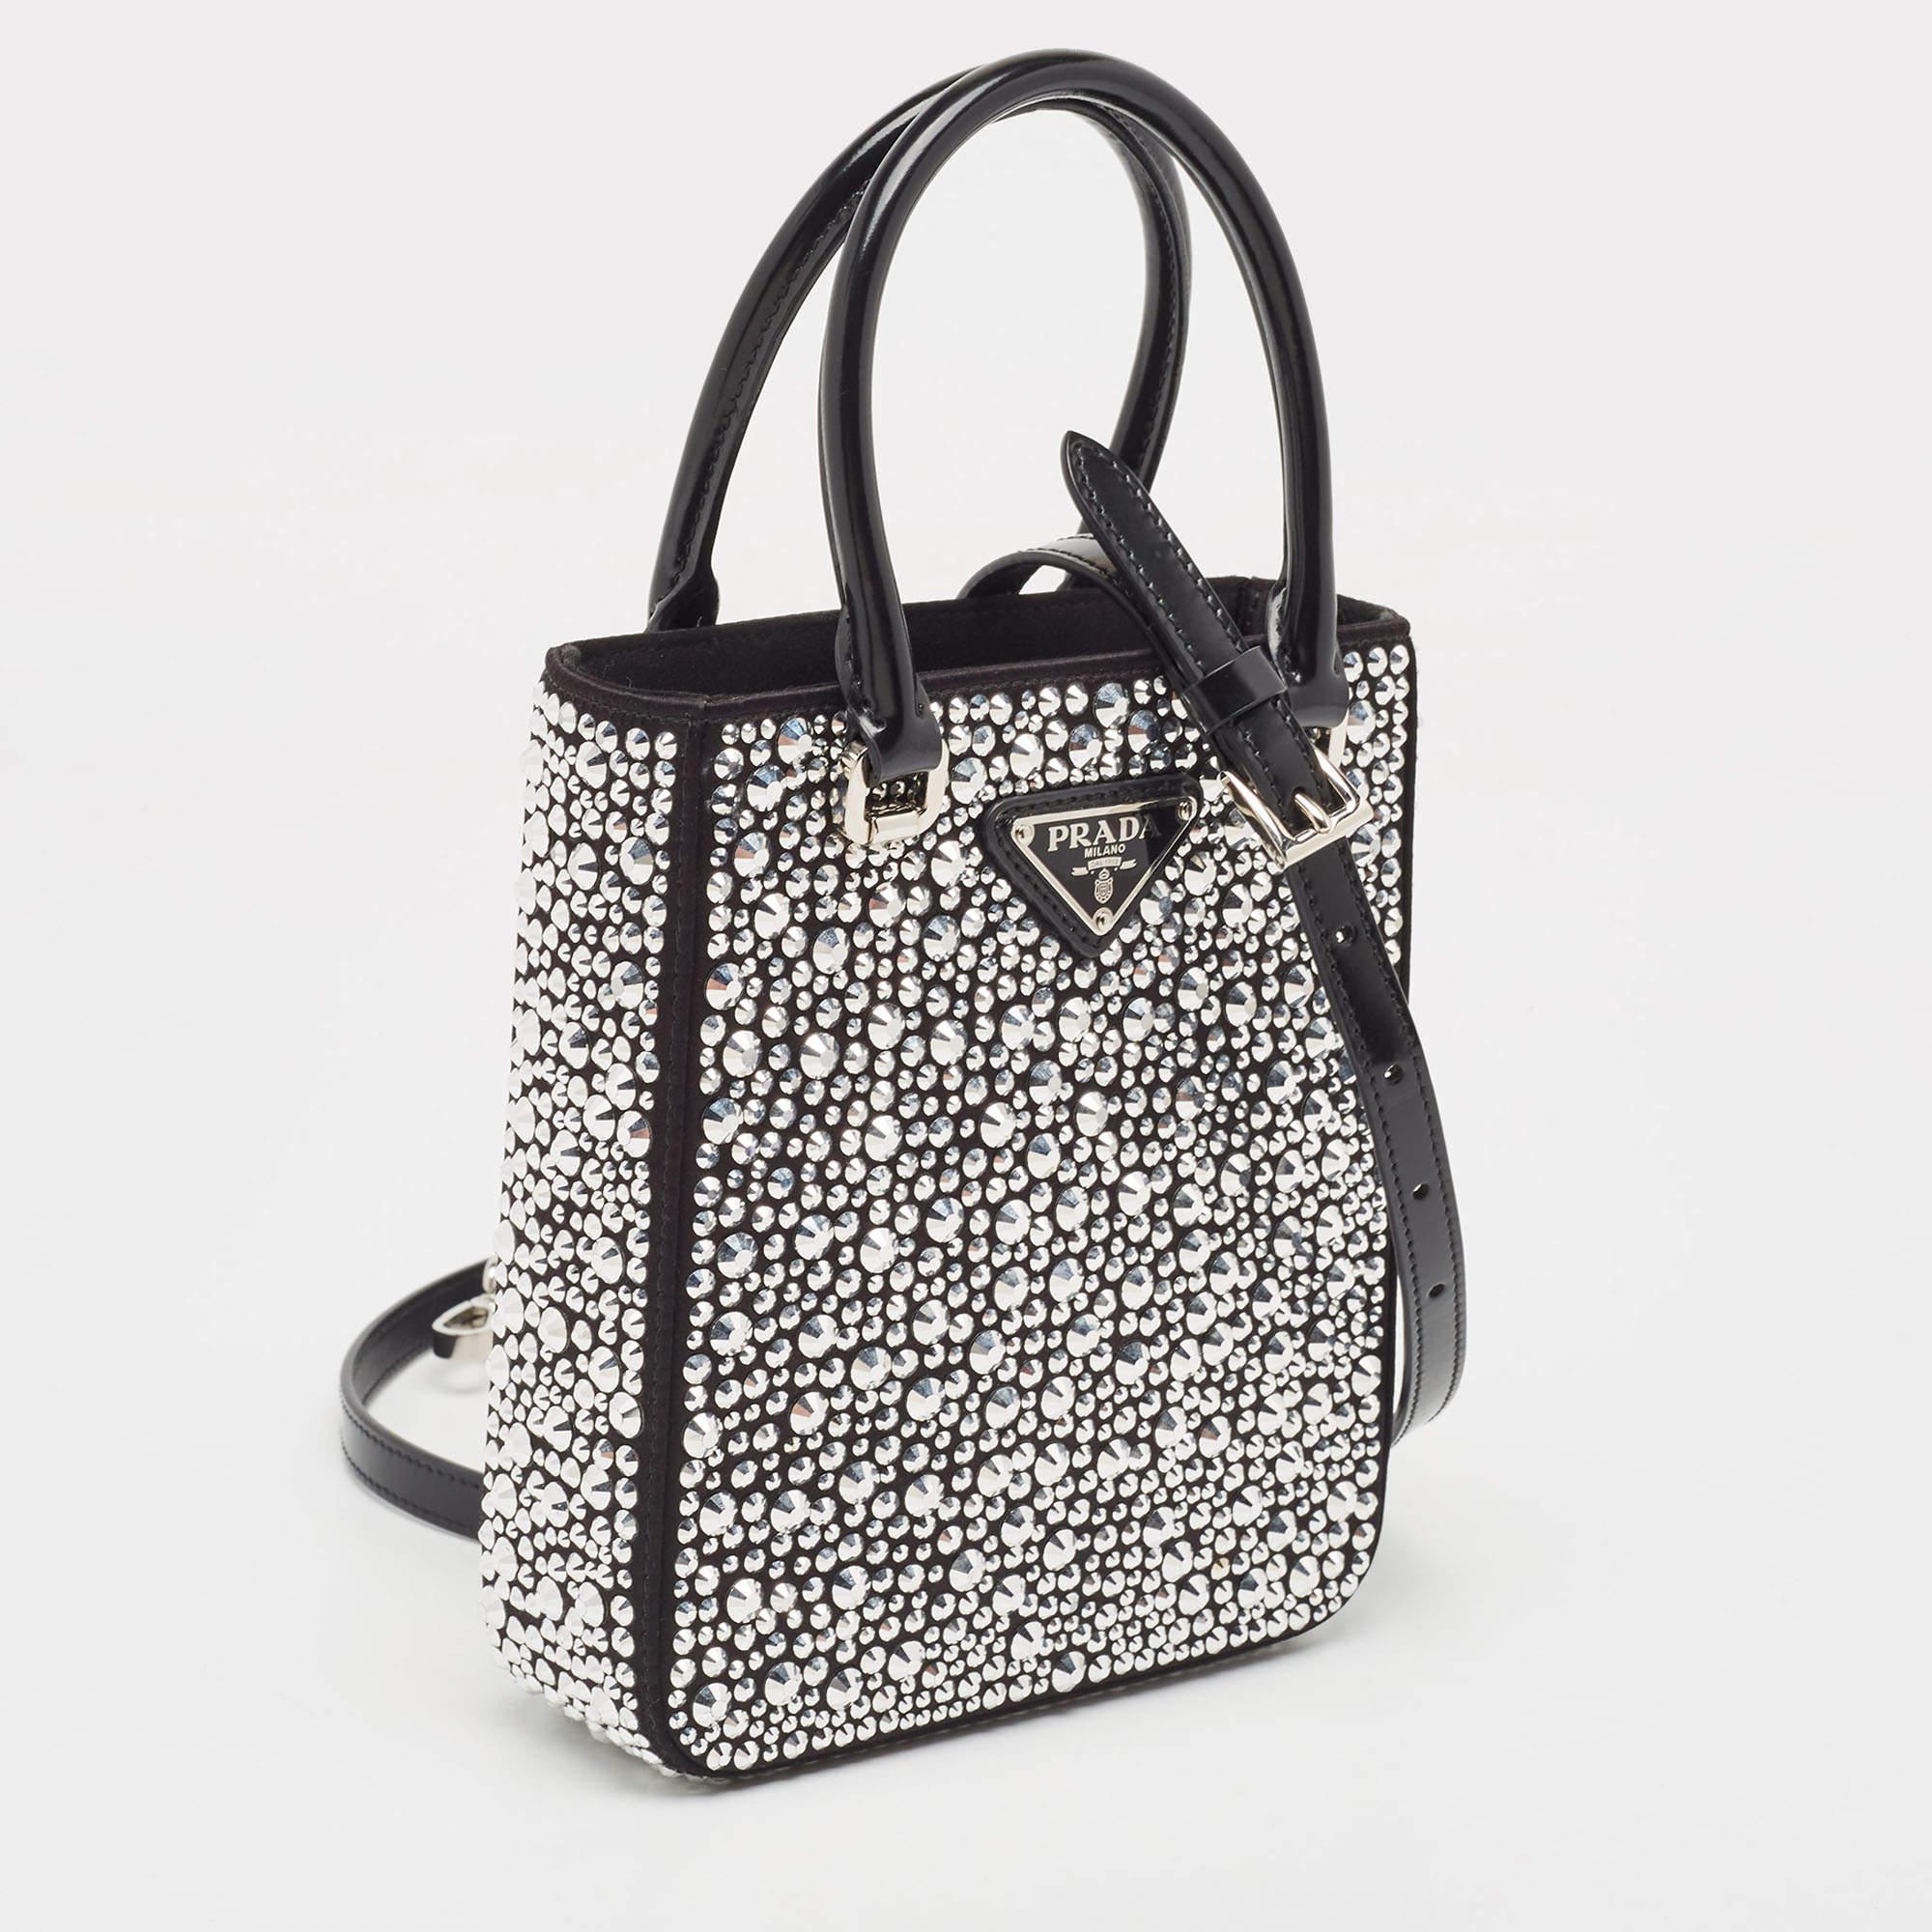 Prada Black Satin and Leather Small Crystal Embellished Tote In Excellent Condition For Sale In Dubai, Al Qouz 2